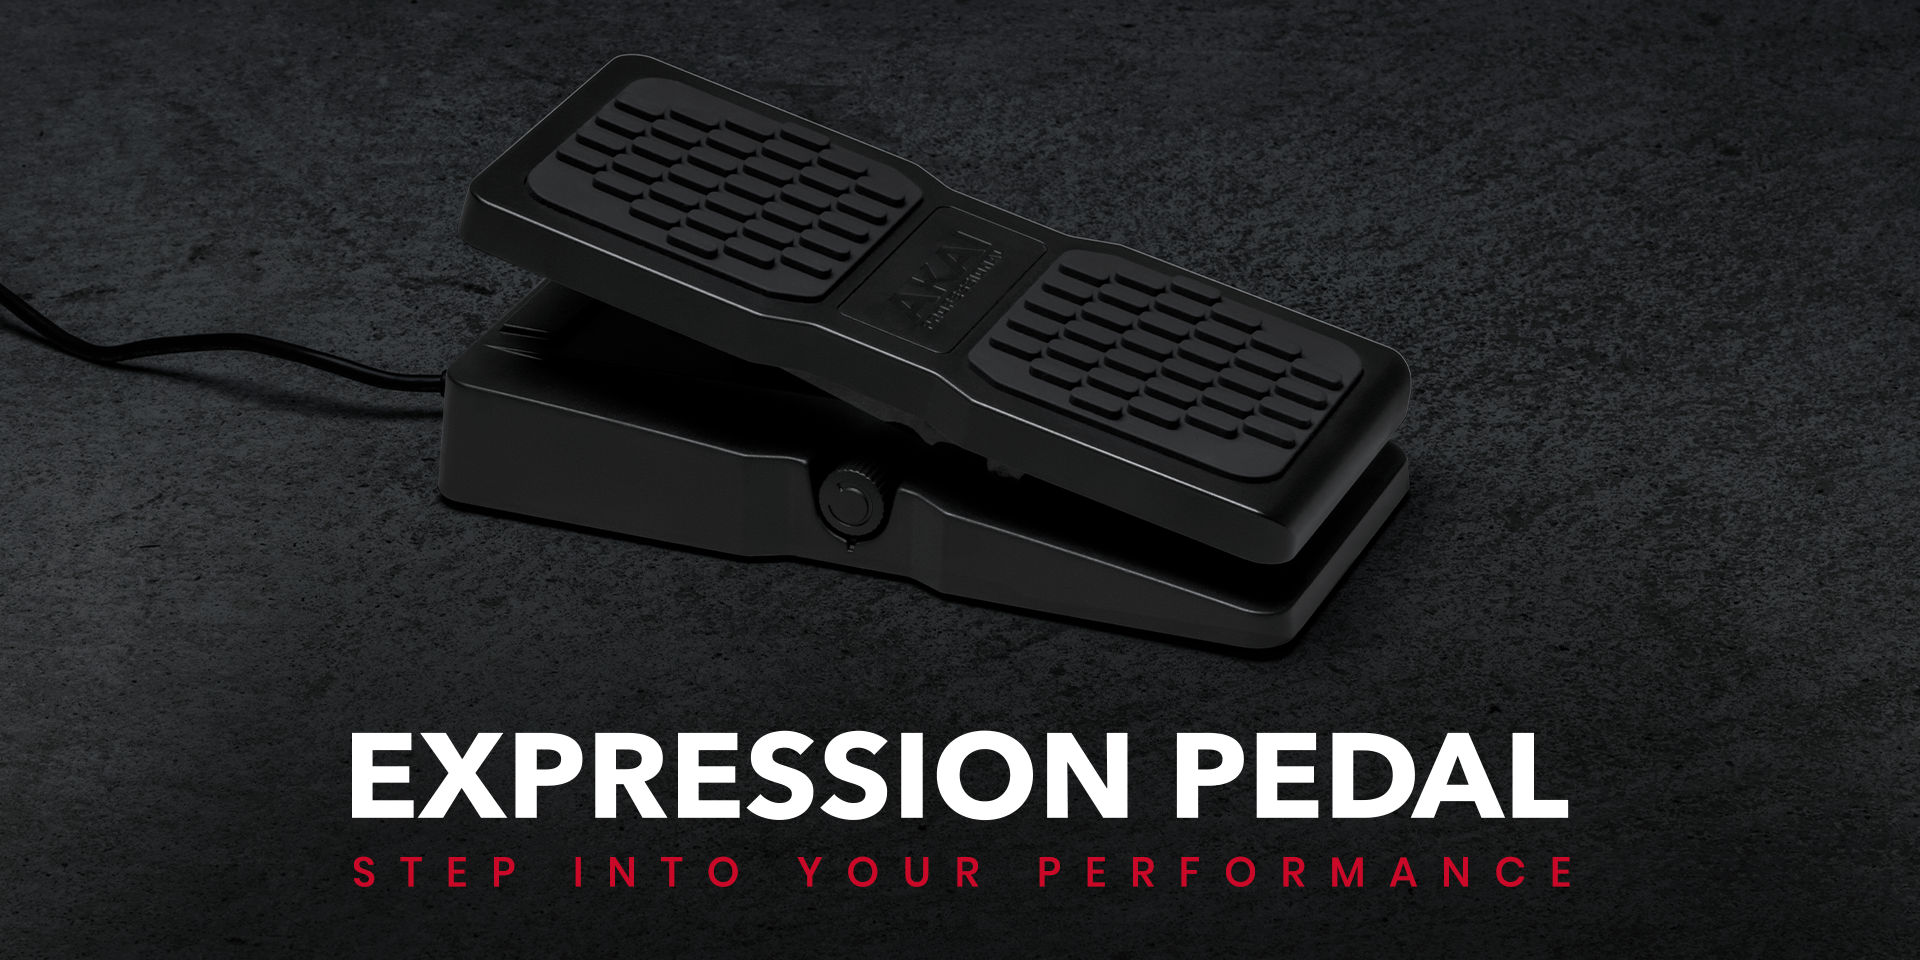 Expression pedal on stage graphic (without foot)